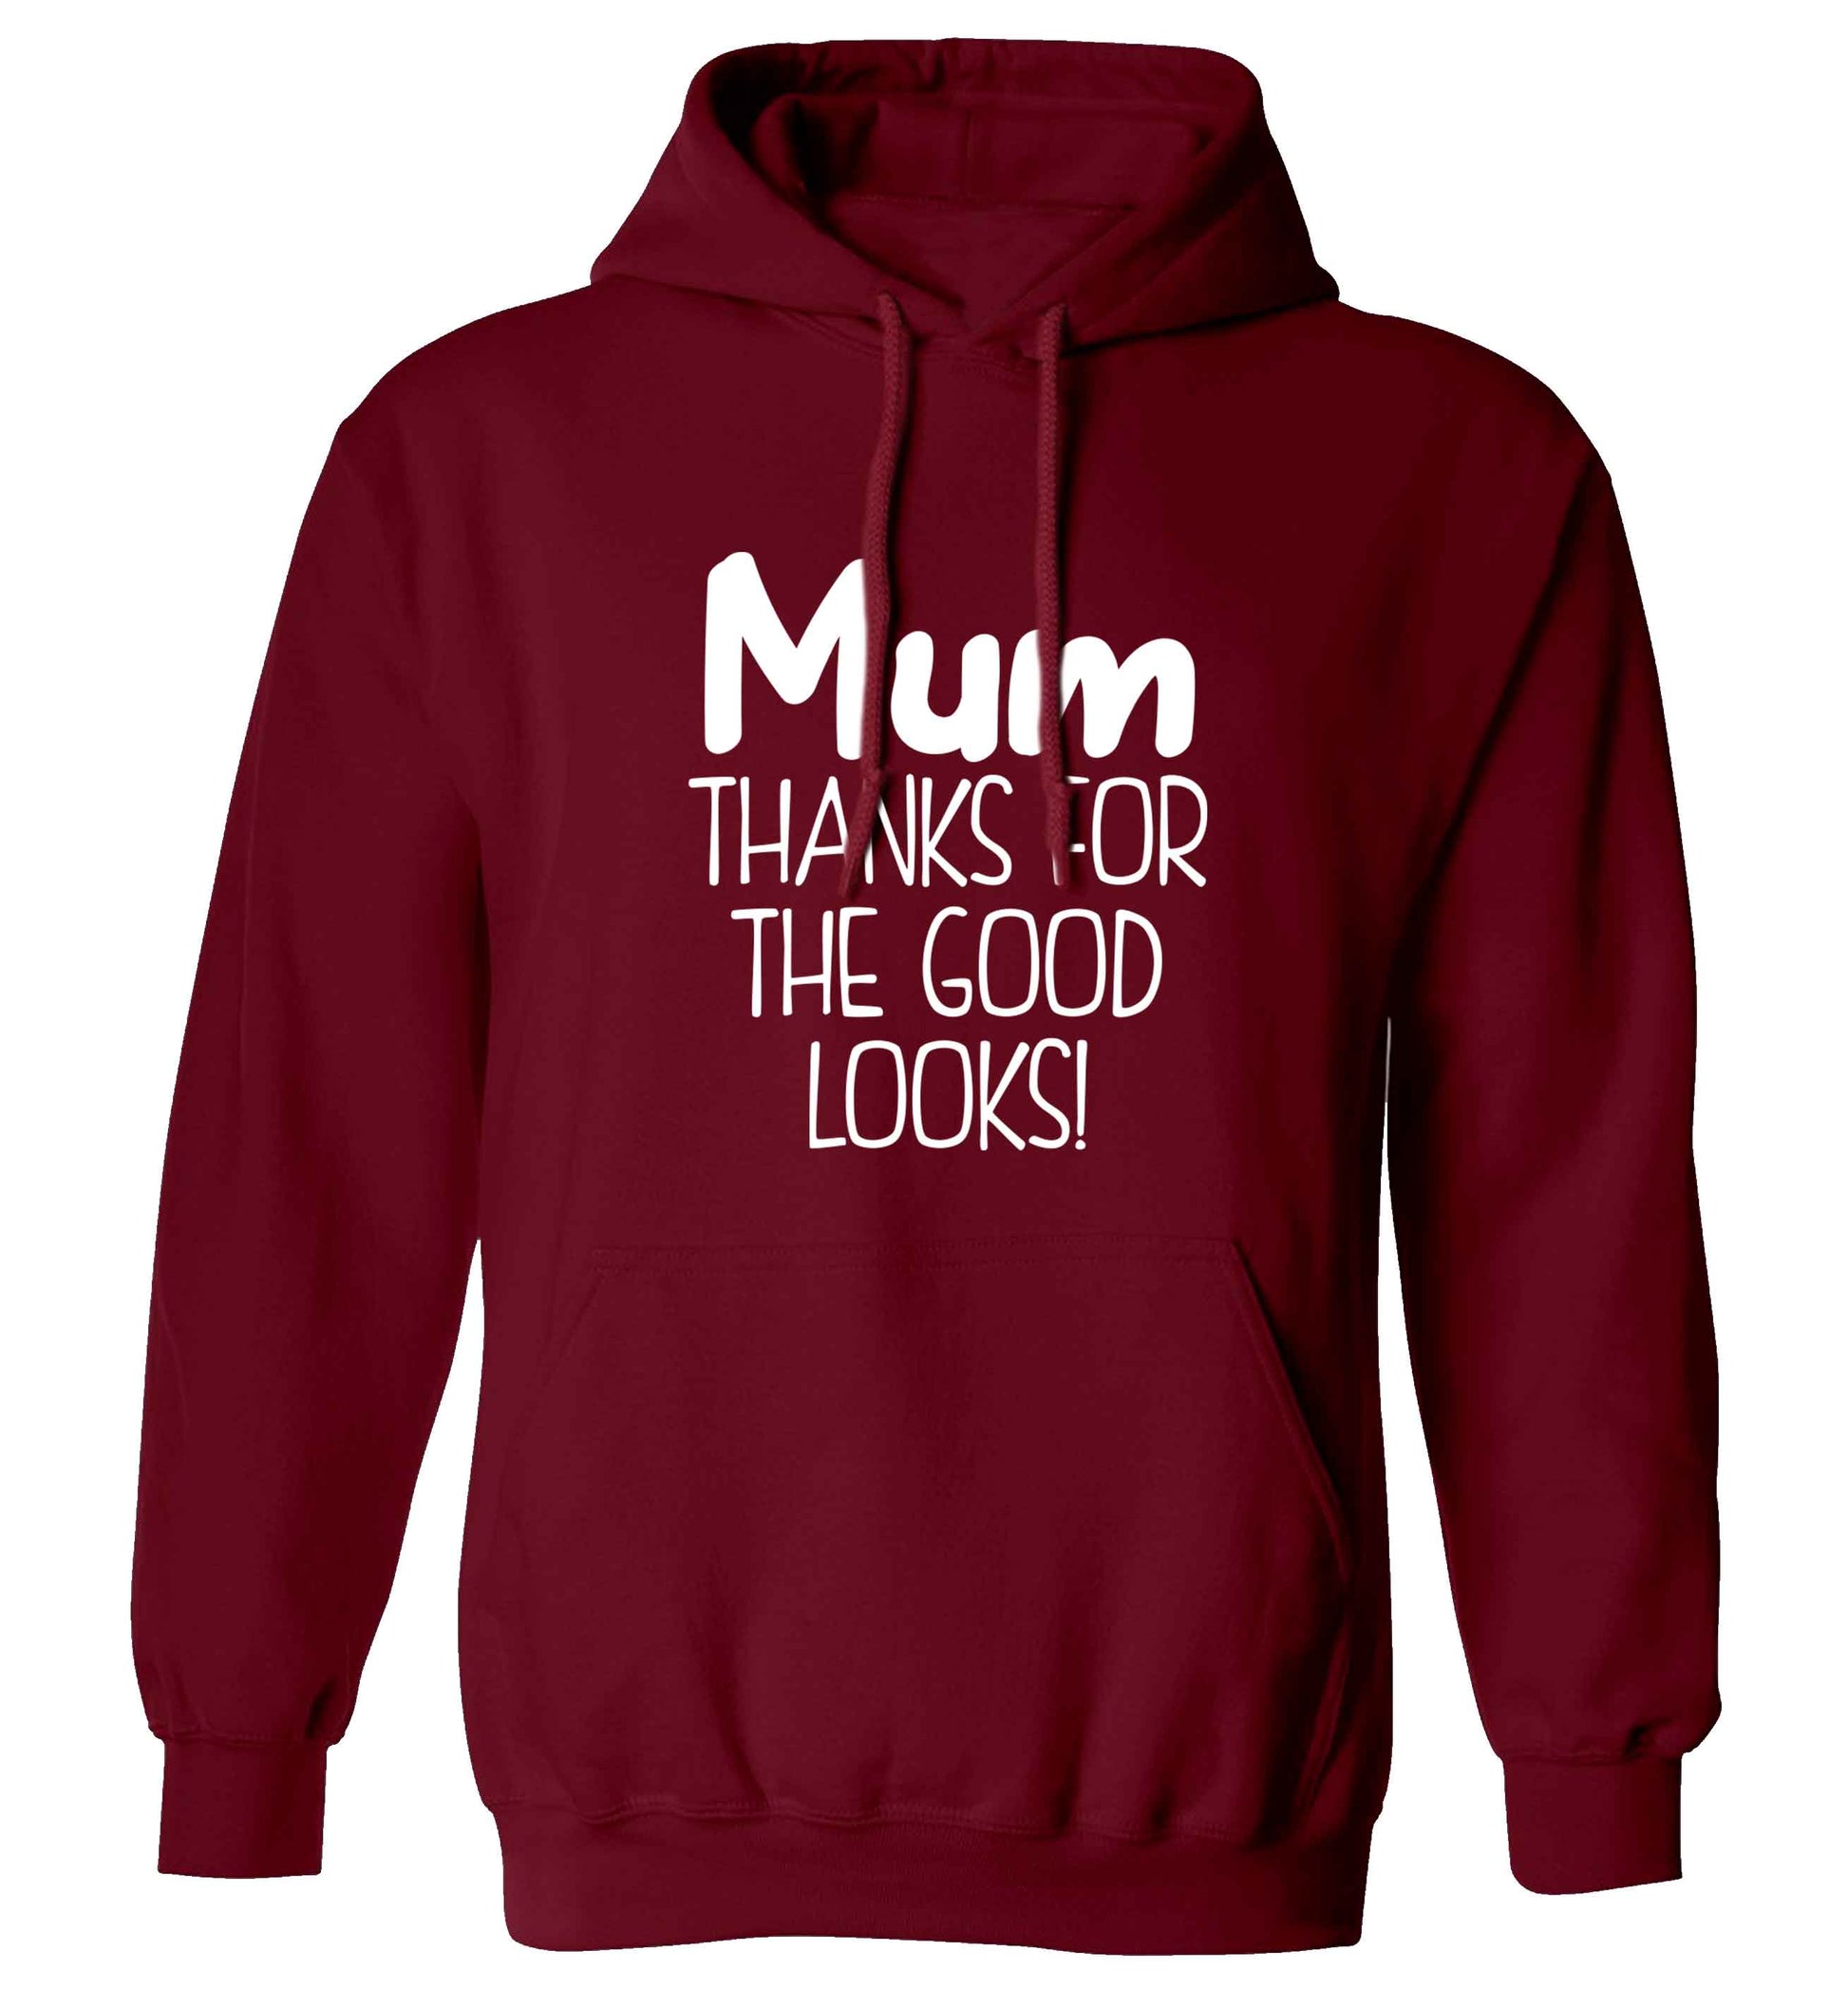 Mum thanks for the good looks! adults unisex maroon hoodie 2XL